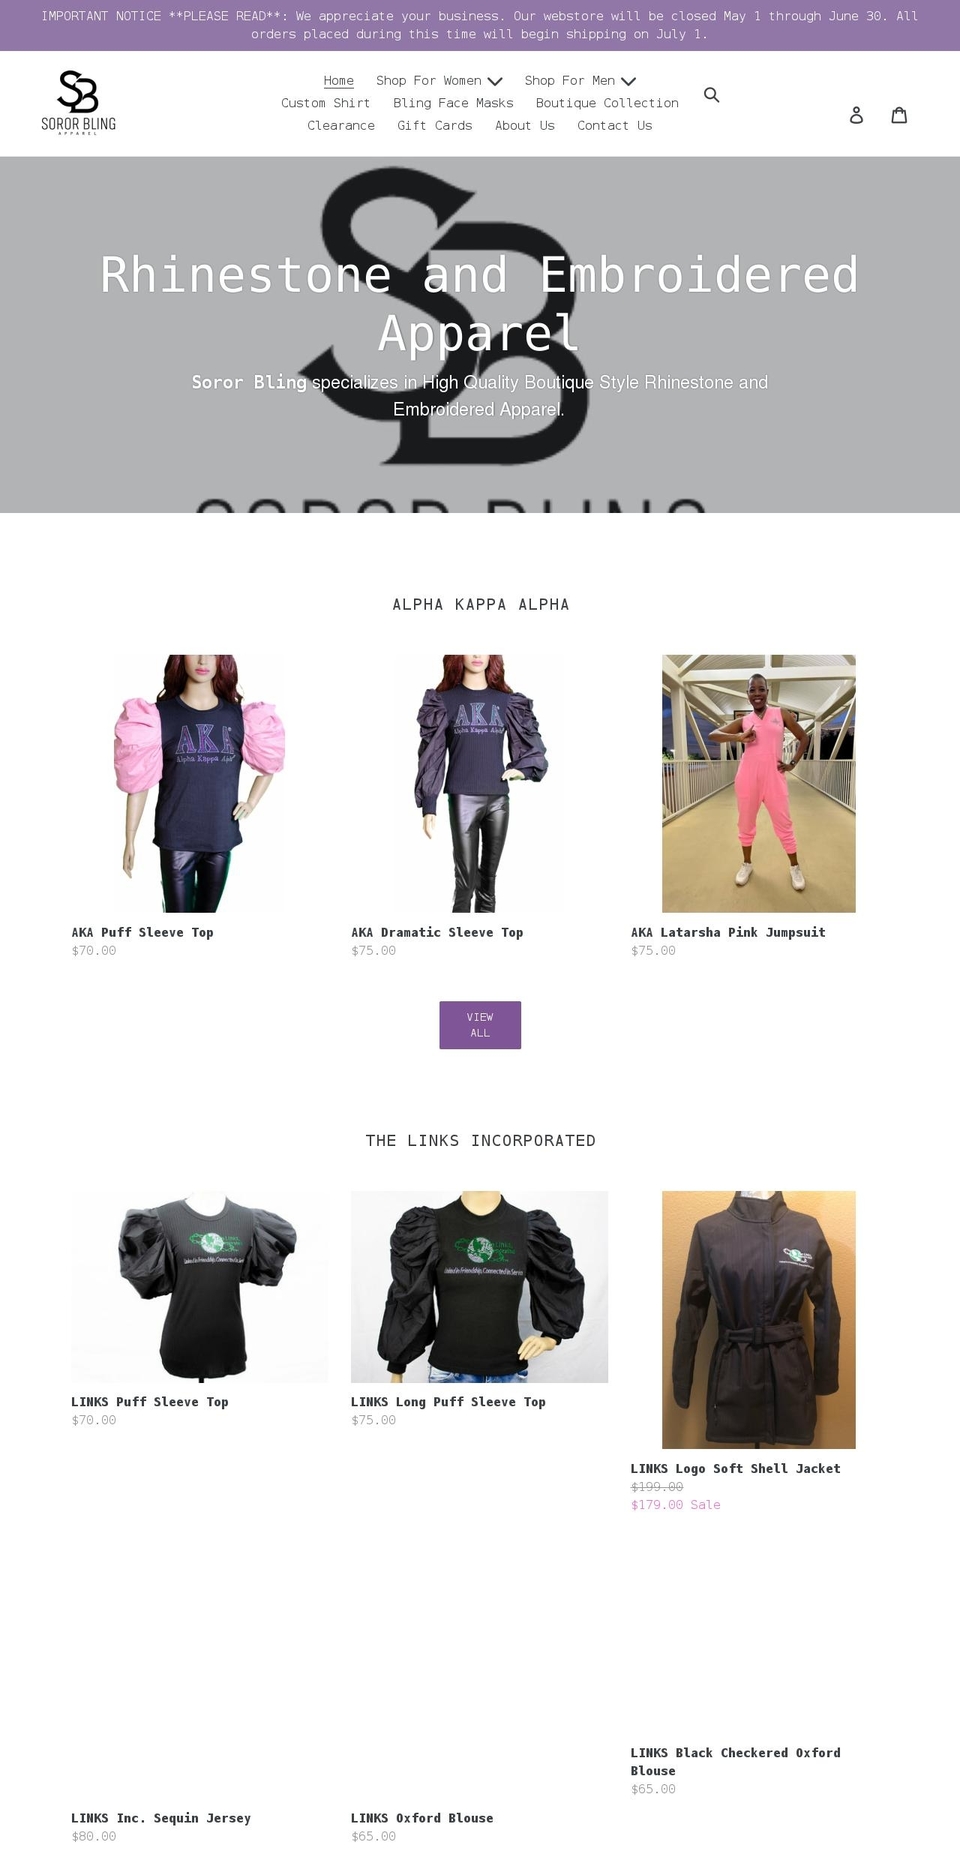 boutique Shopify theme site example sororbling.com